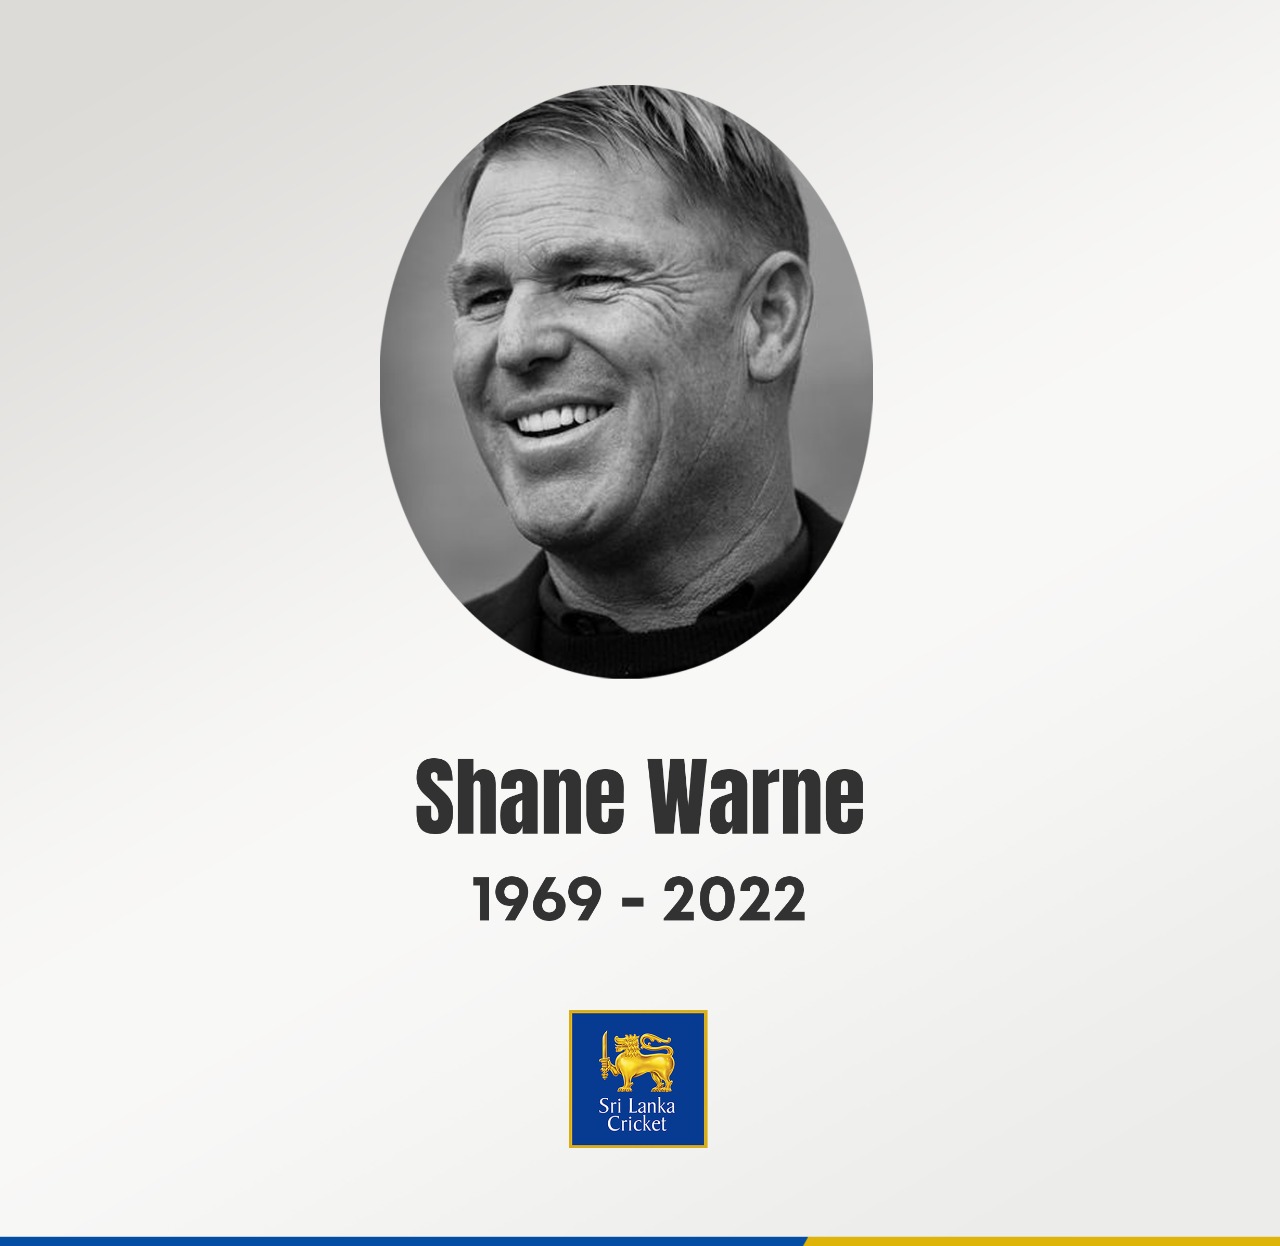 Sri Lankans will best remember spin great Shane Warne for his support during Tsunami devastation